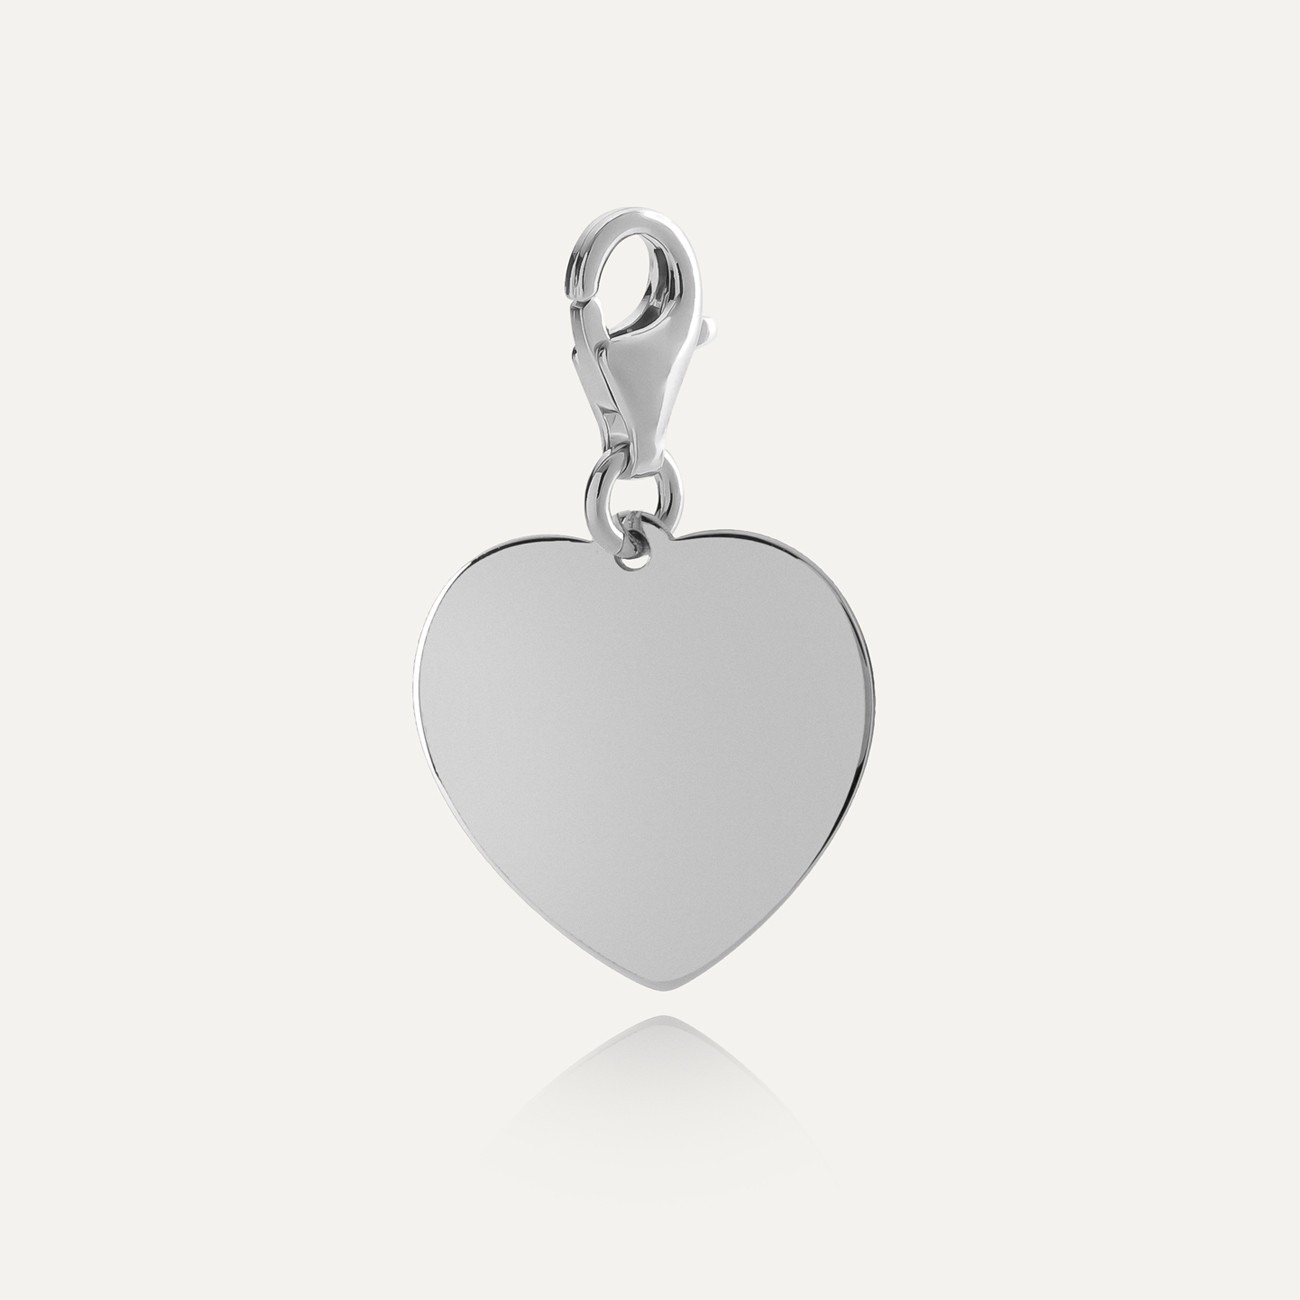 CHARM WITH ENGRAVE, HEART, SILVER 925,  RHODIUM OR GOLD PLATED